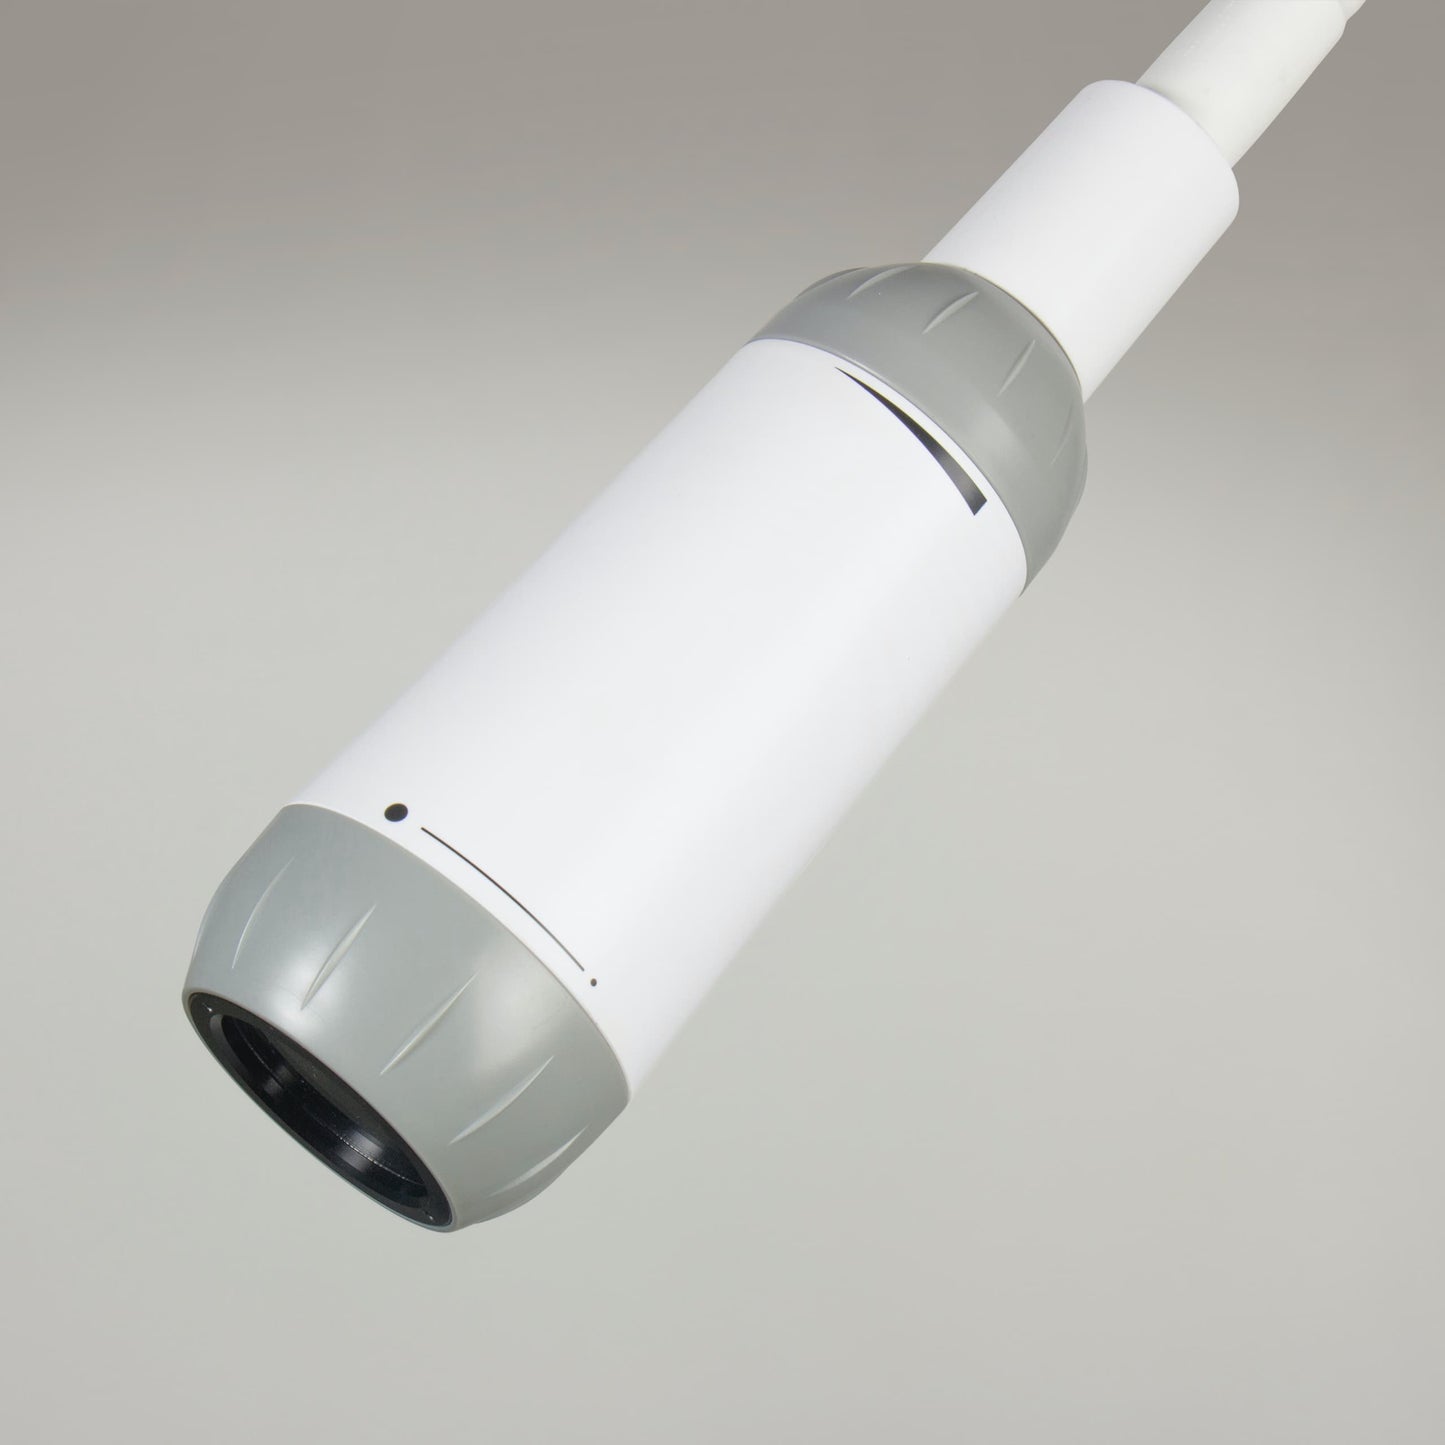 Opticlar - 3W LED Examination Light - Mains powered/ Rechargeable, Flexible Arm, Universal clamp